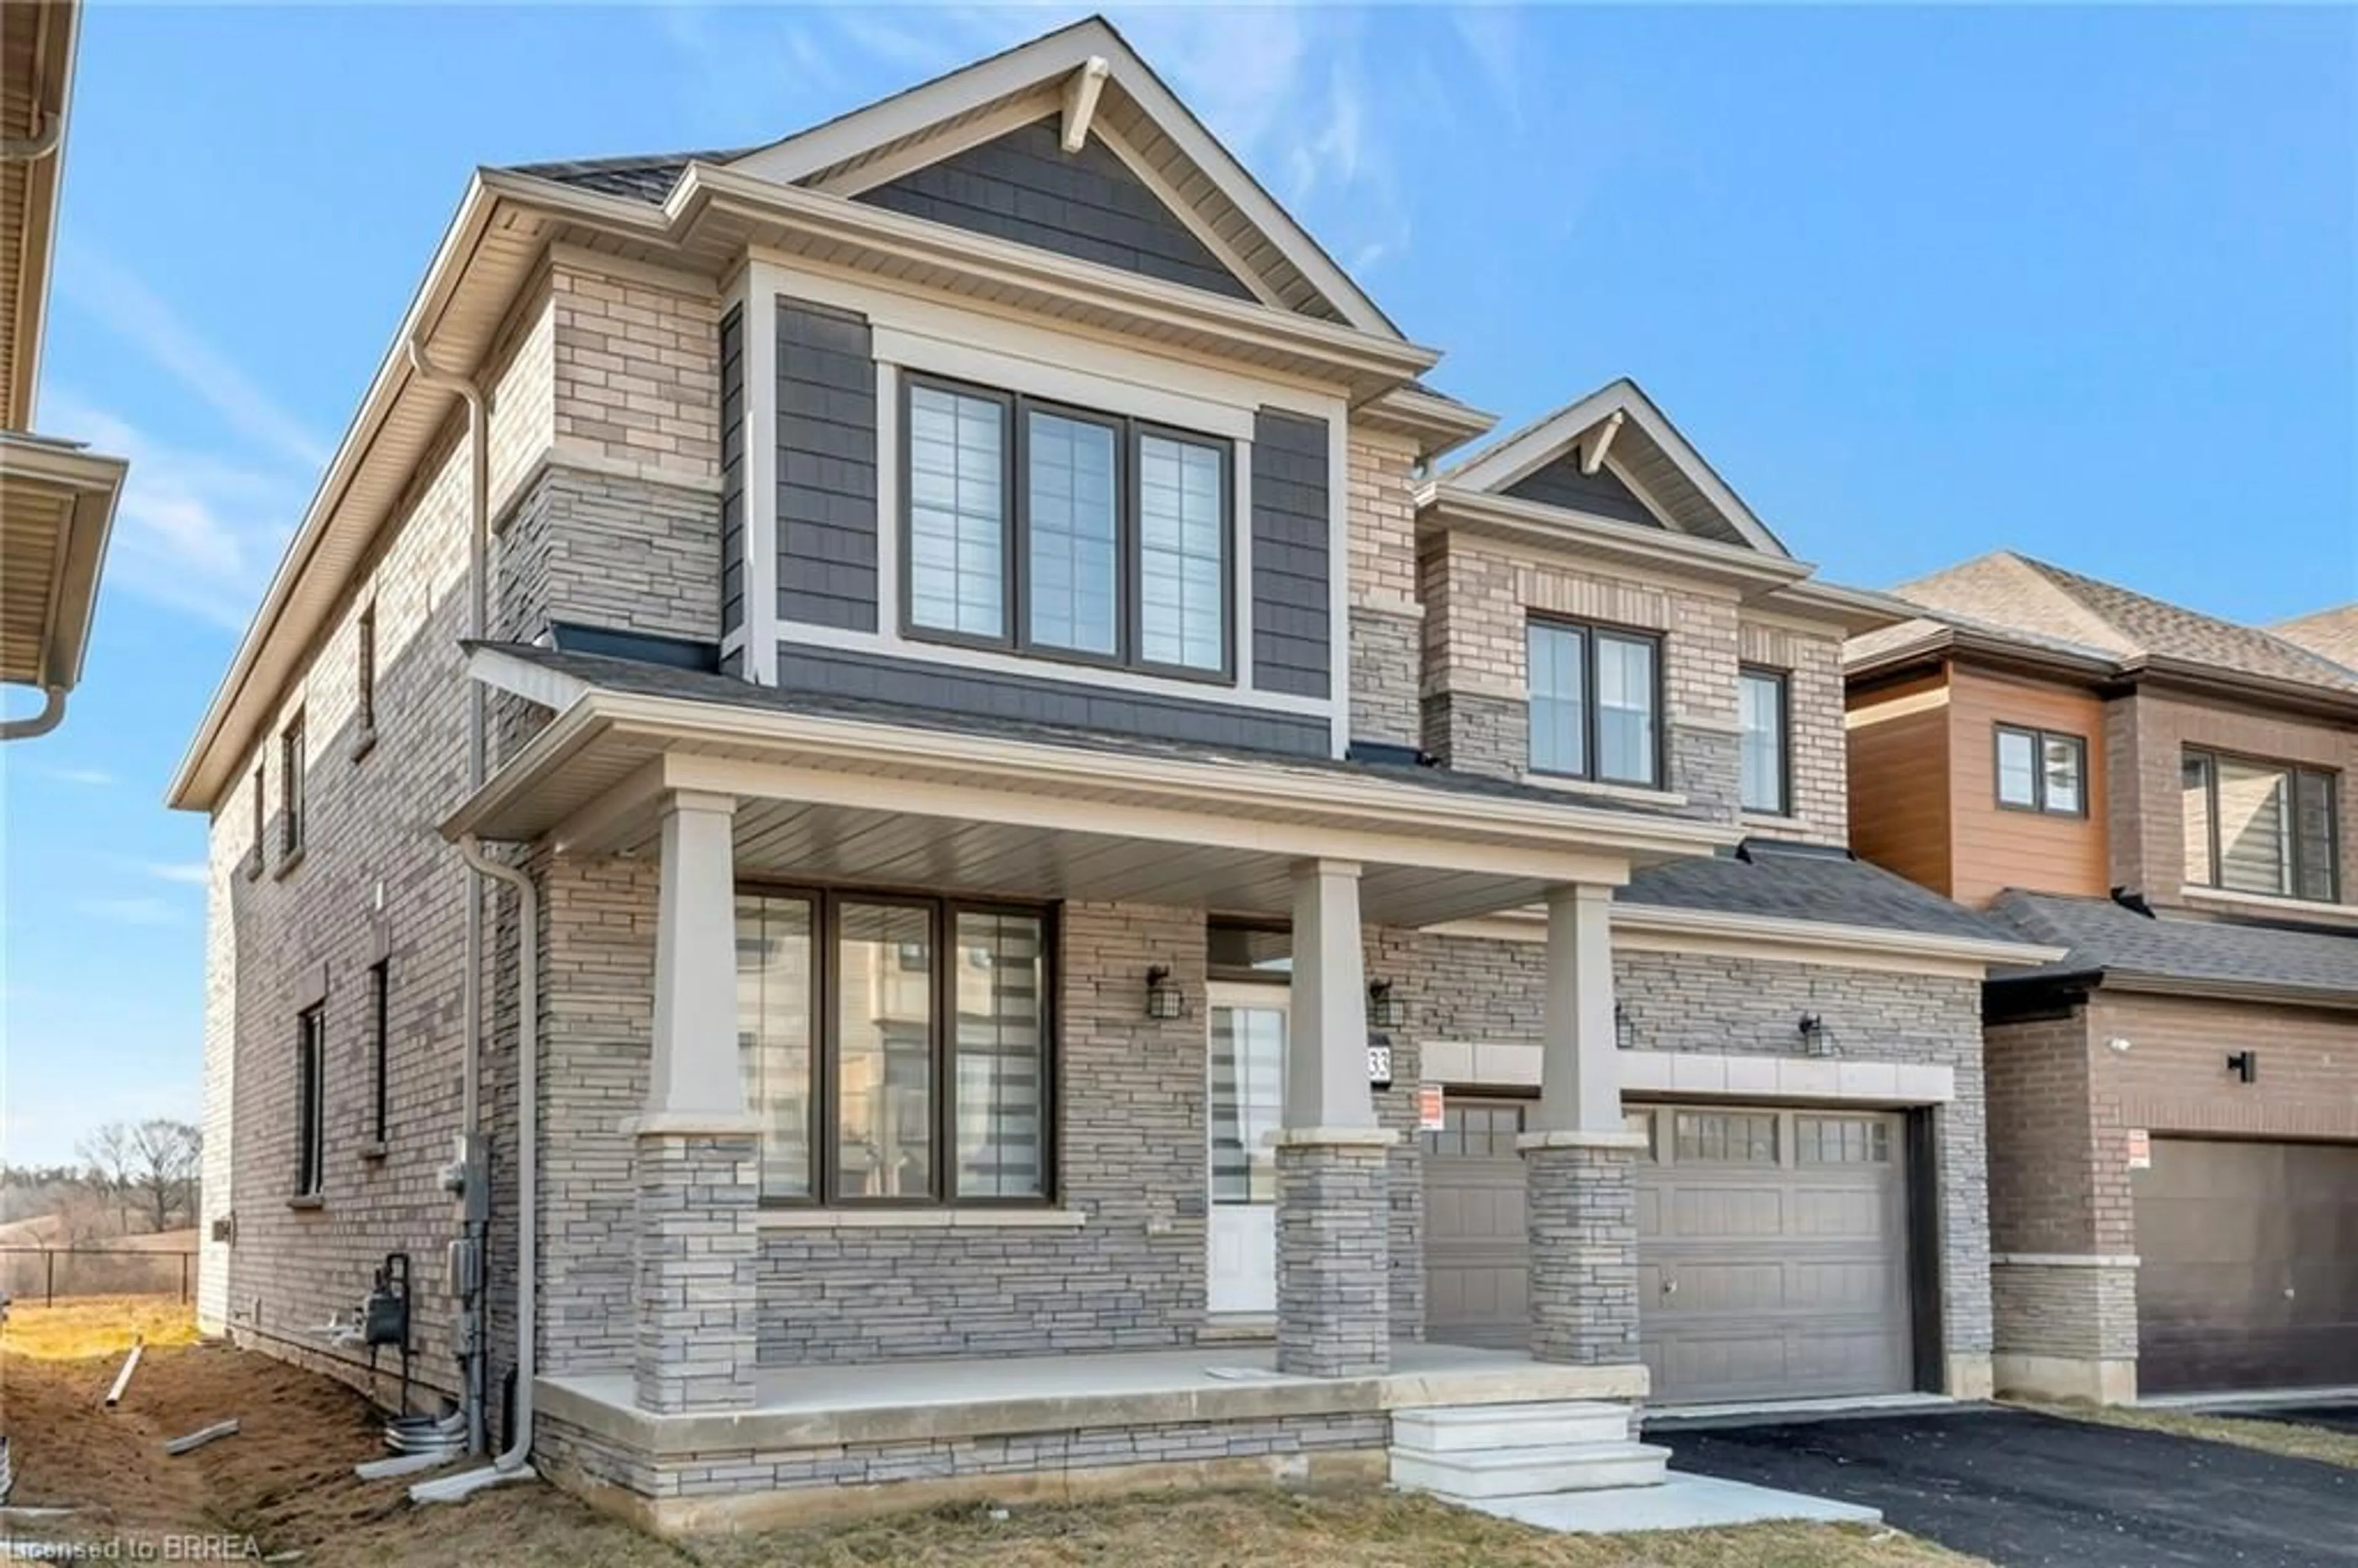 Home with brick exterior material for 33 Bee Cres, Brantford Ontario N3T 0V7